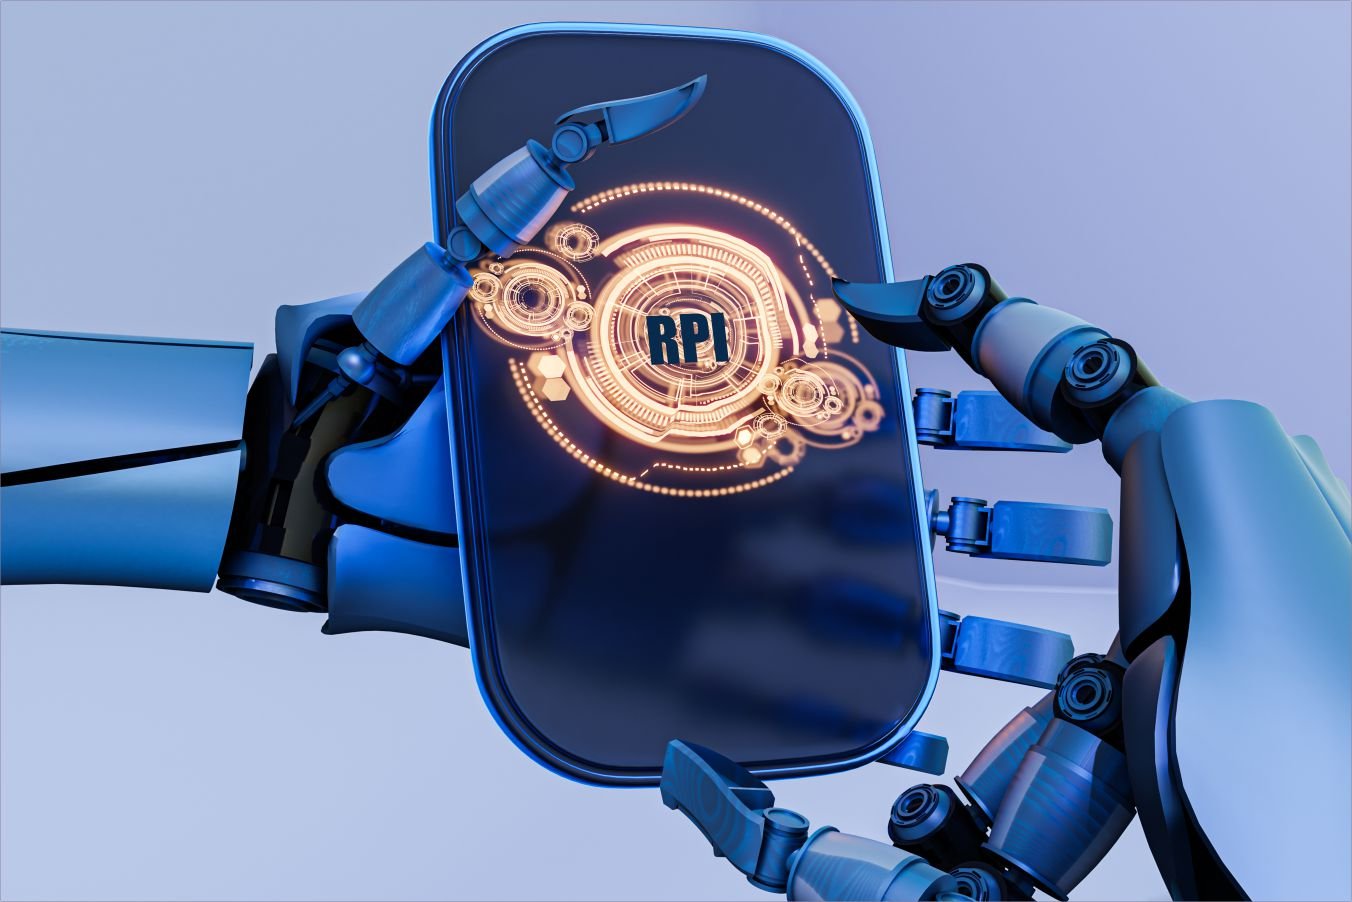 Automation vs Hyperautomation vs RPA: What's the difference?